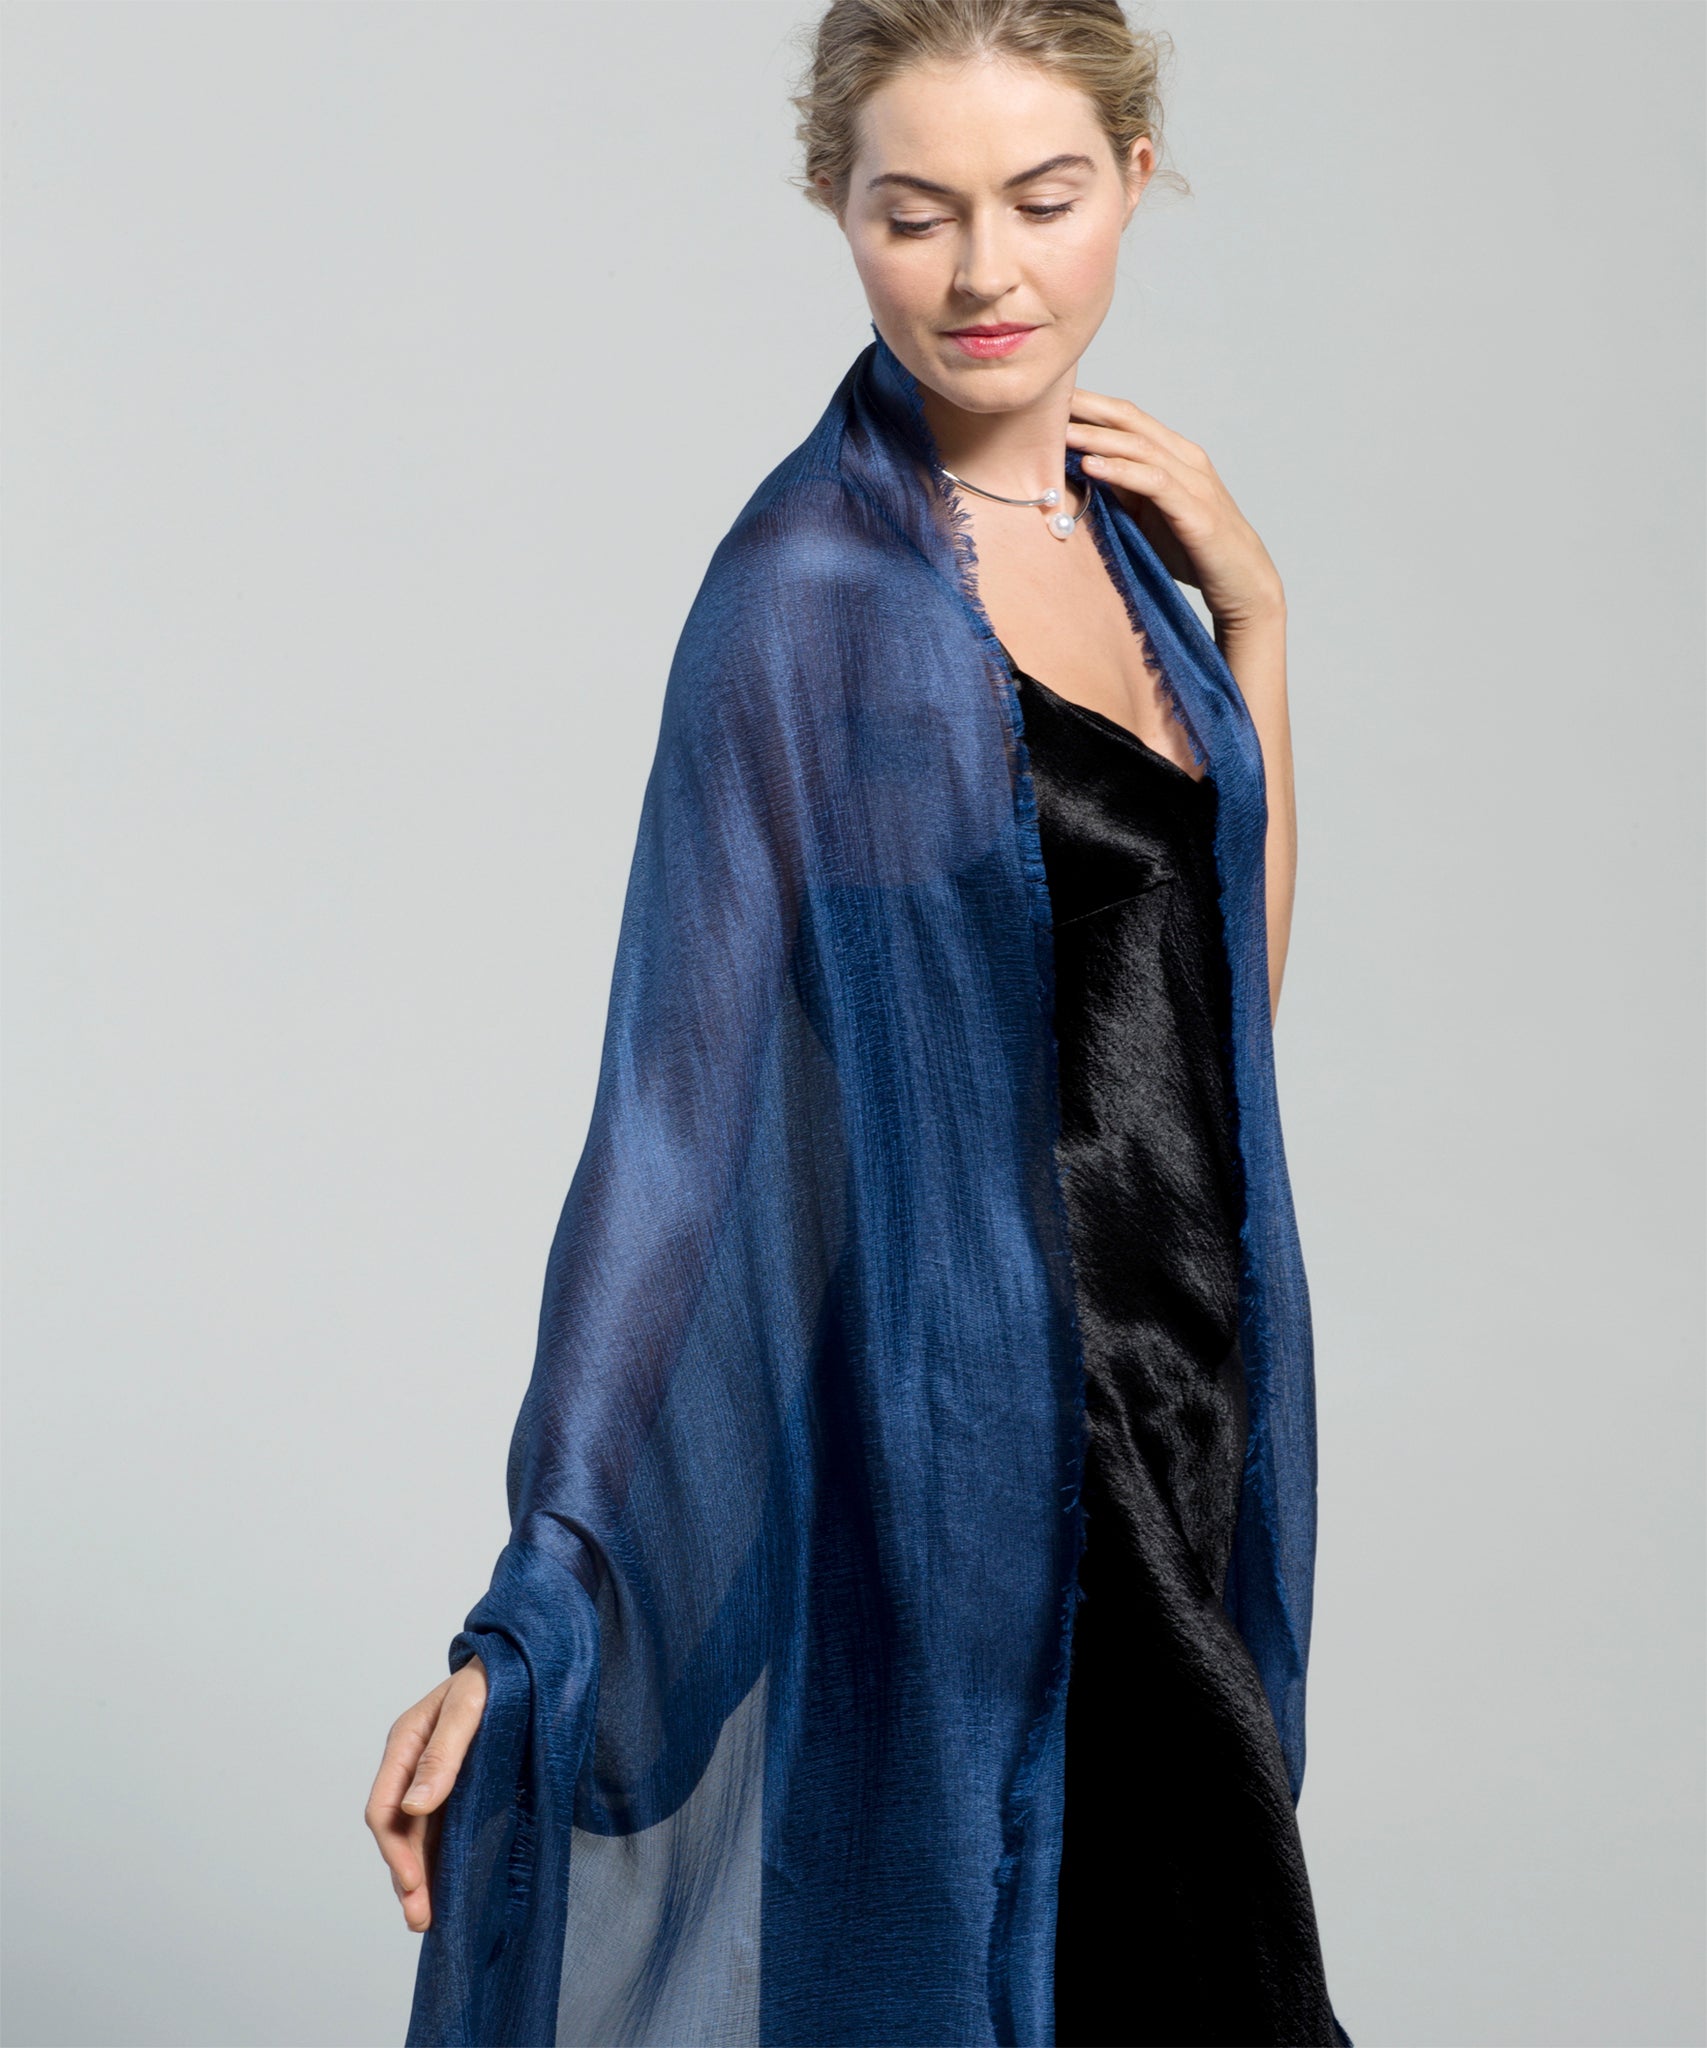 Radiance Wrap in color Navy